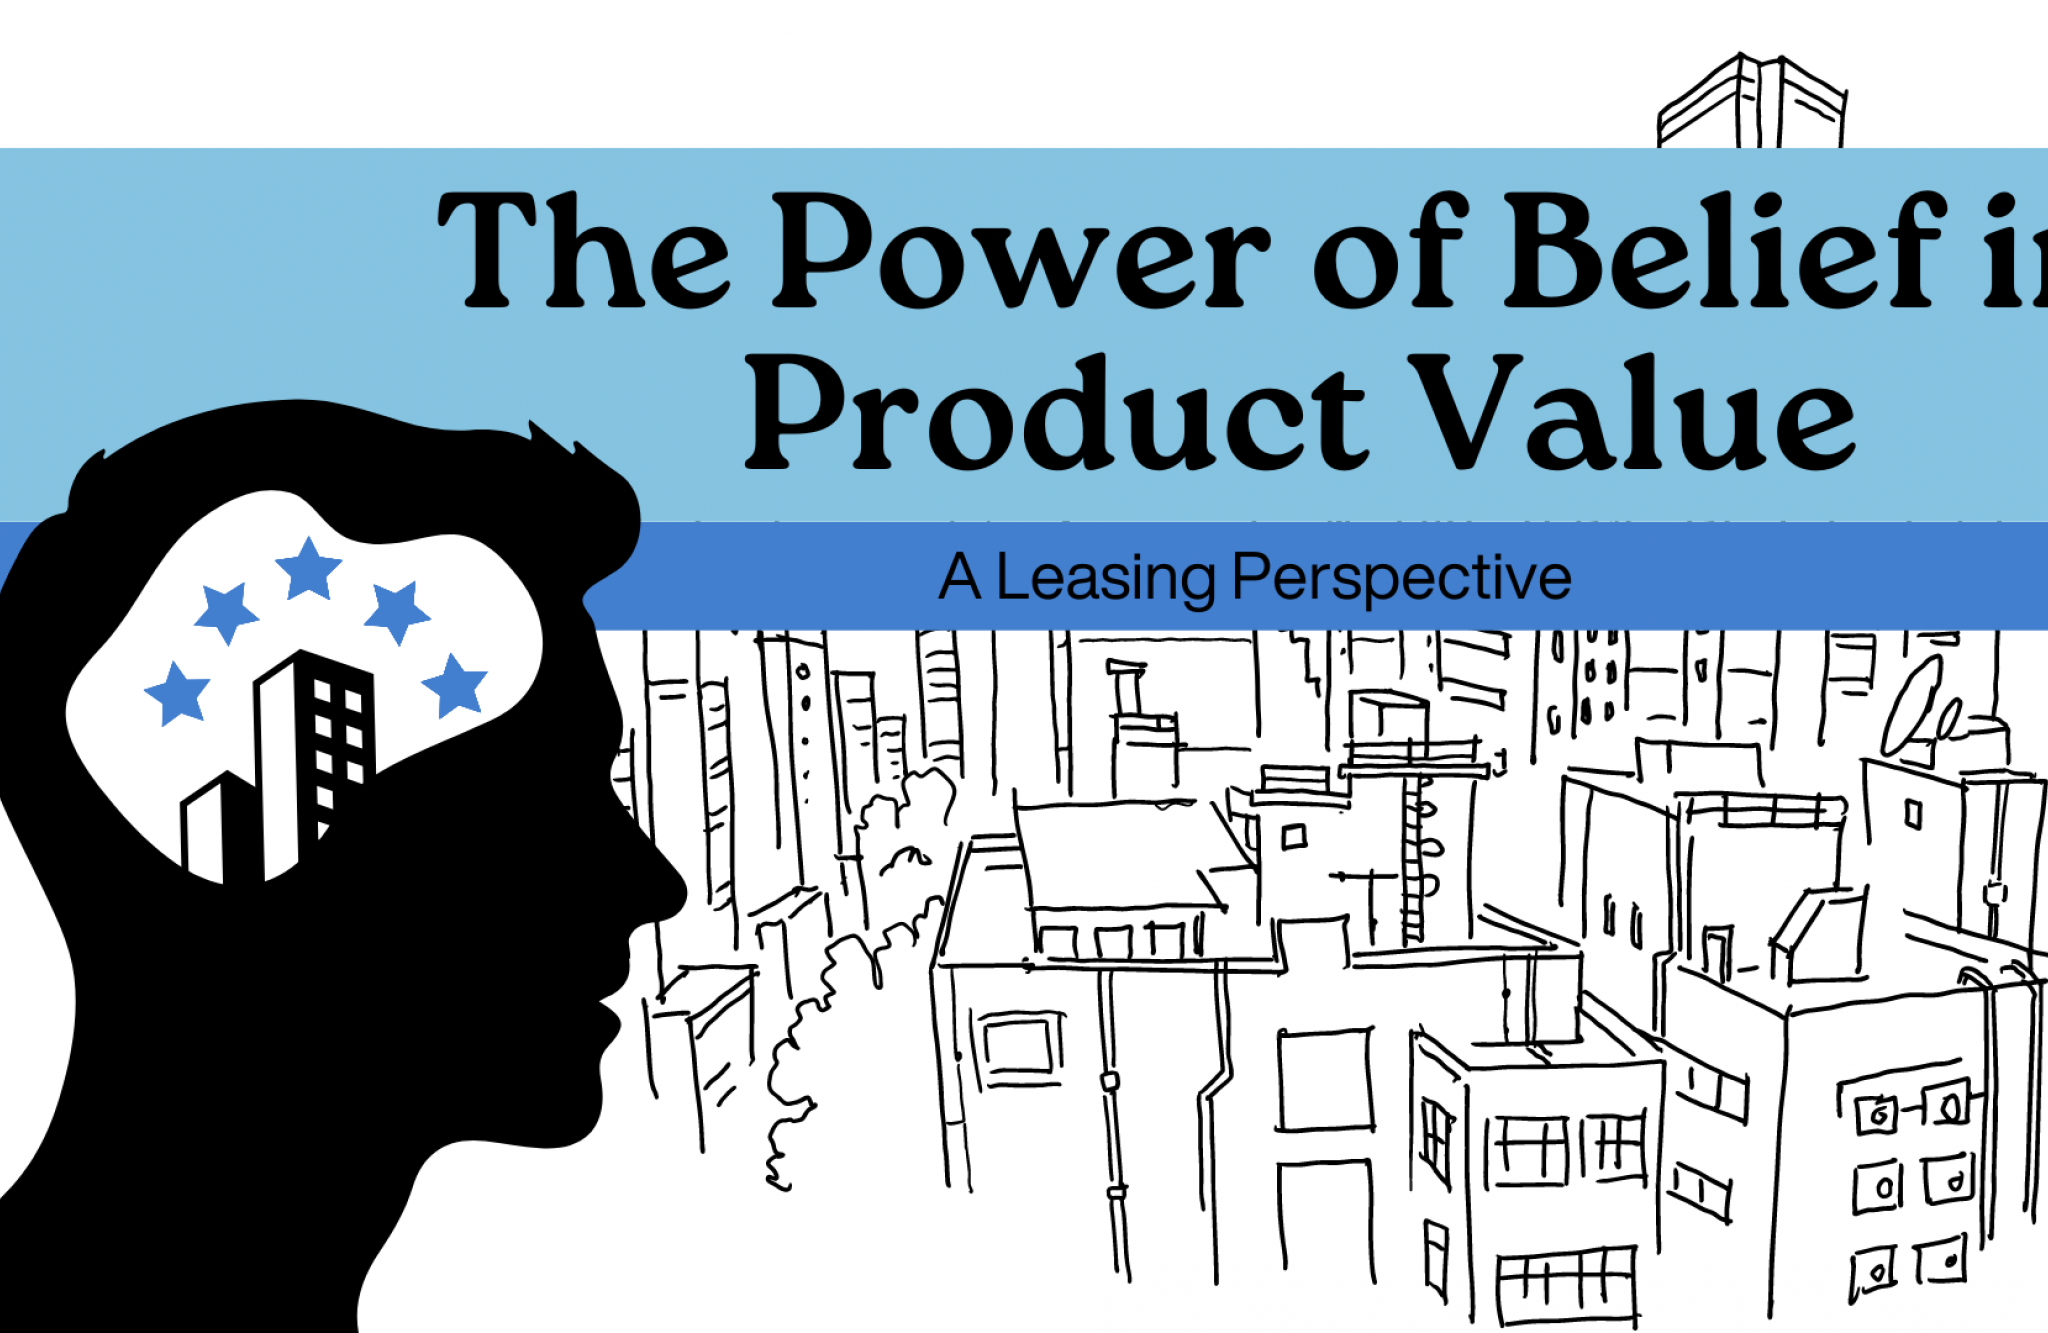 The Power of Belief in Product Value